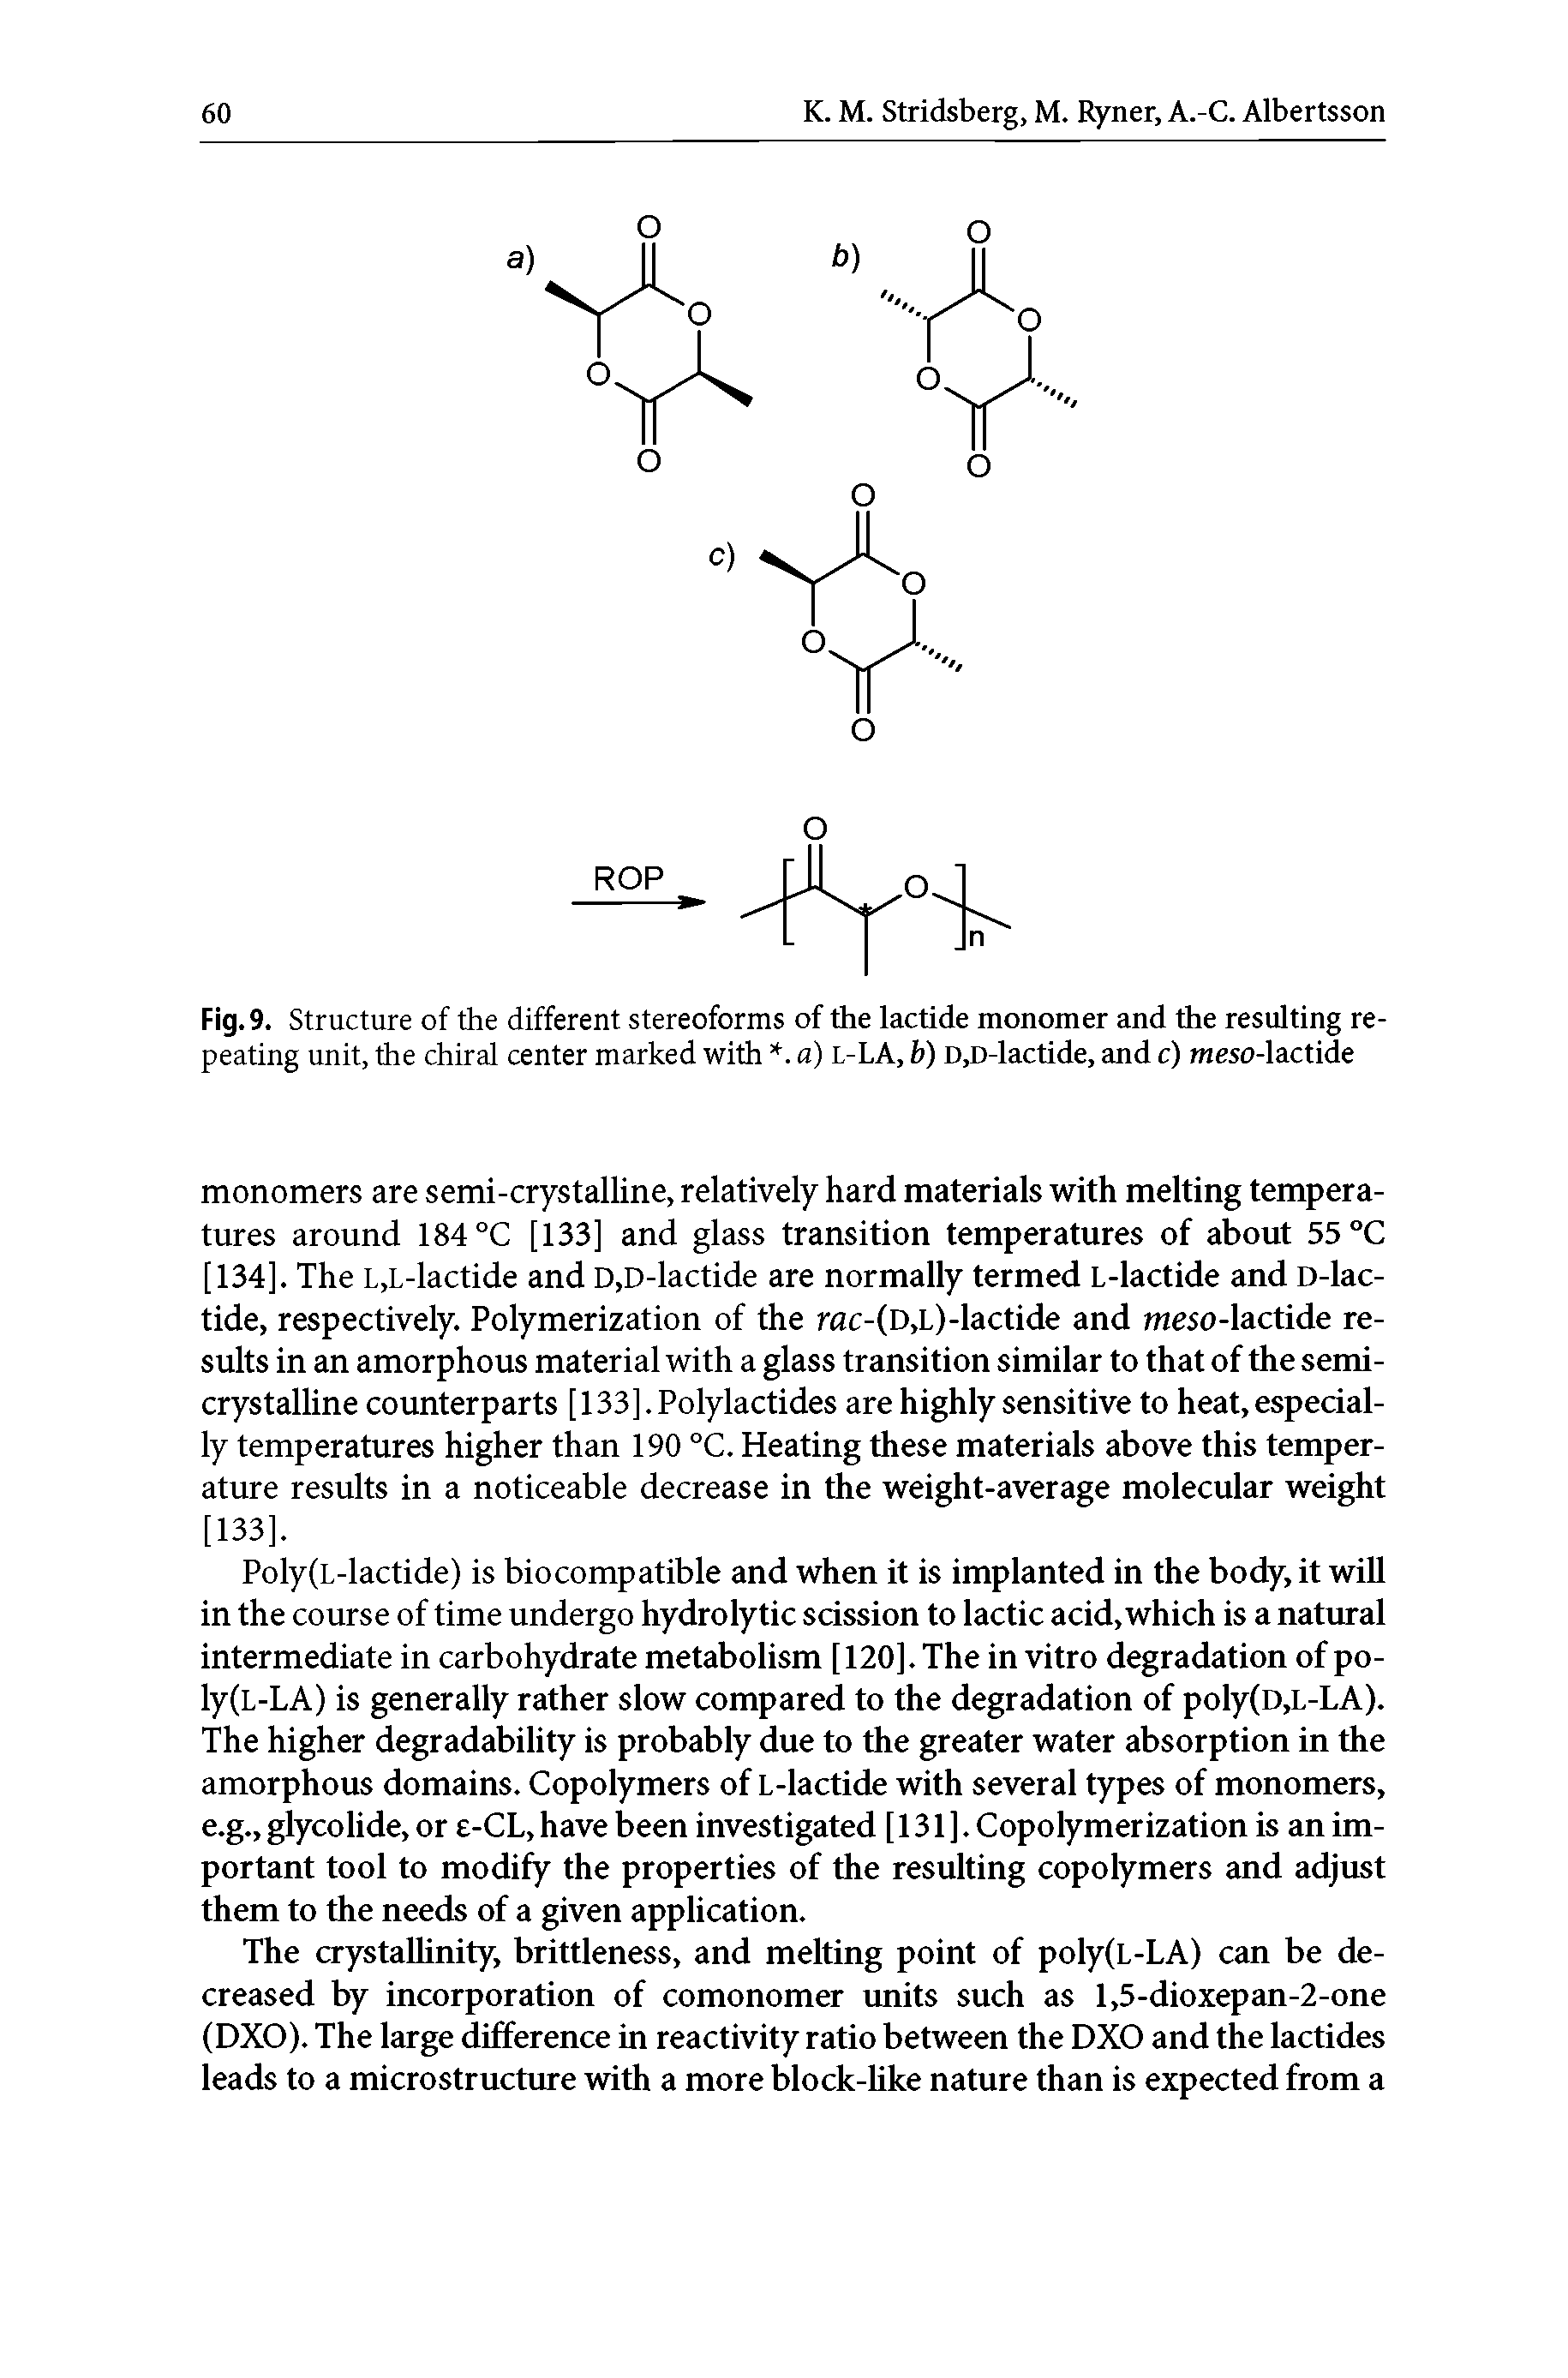 Fig. 9. Structure of the different stereoforms of the lactide monomer and the resulting repeating unit, the chiral center marked with. a) l-LA, b) D,D-lactide, and c) meso-lactide...